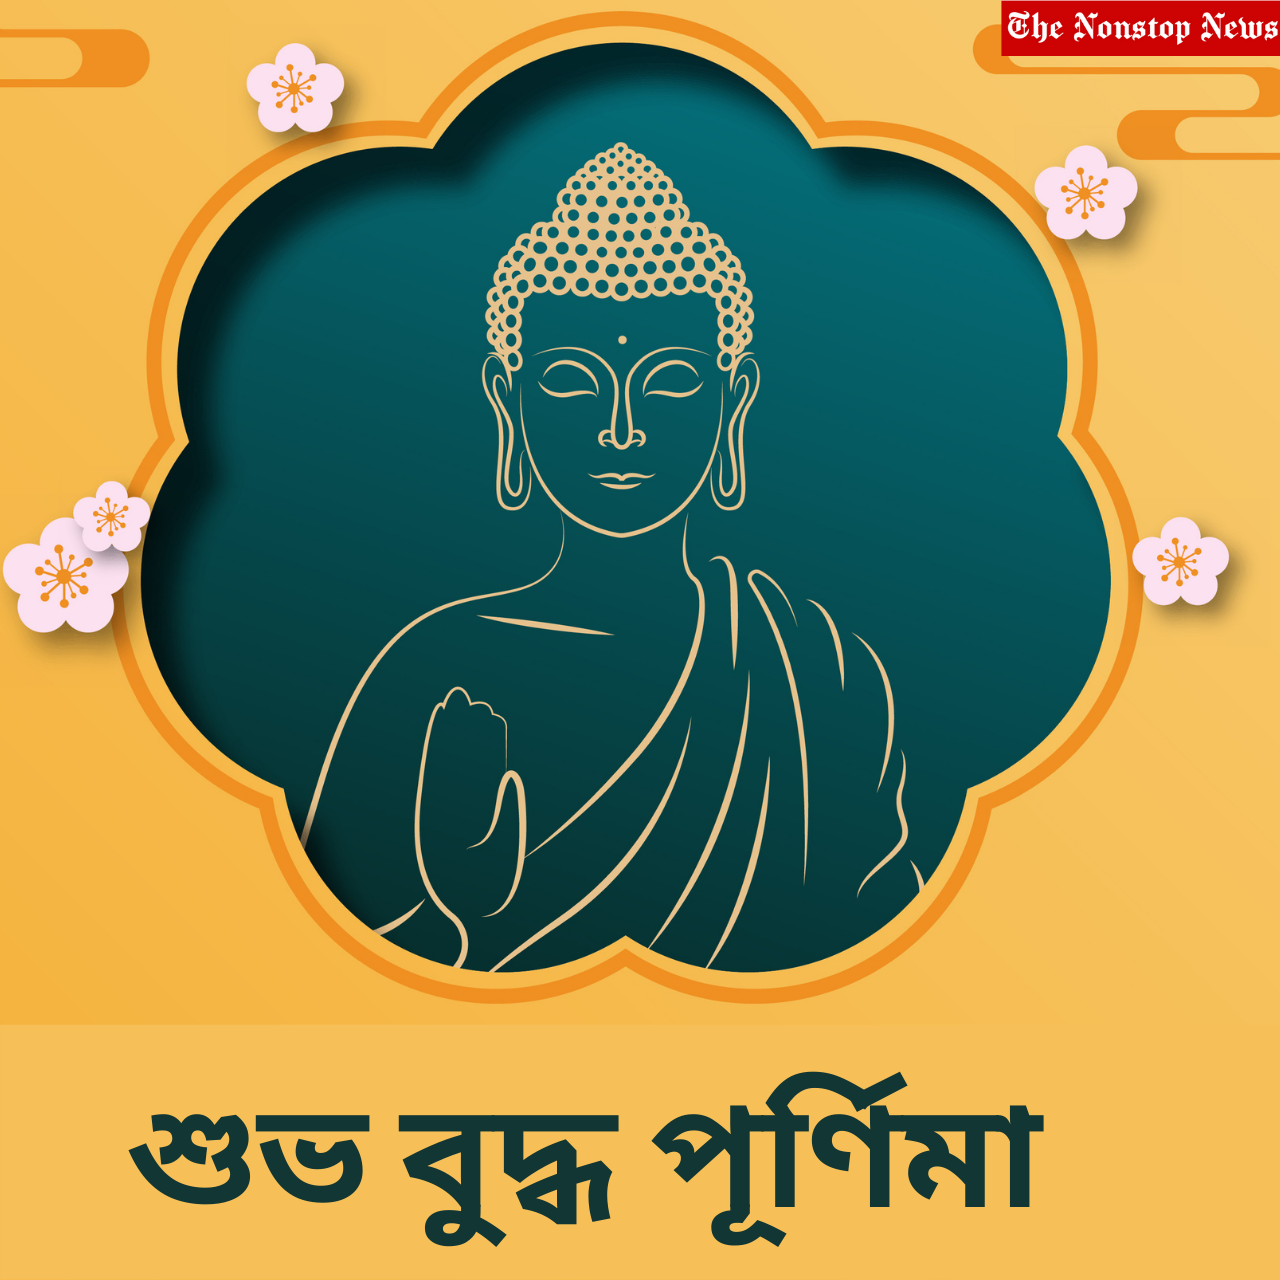 Happy Buddha Purnima 2022: Bengali Greetings, HD Images, Messages, Wishes, Quotes